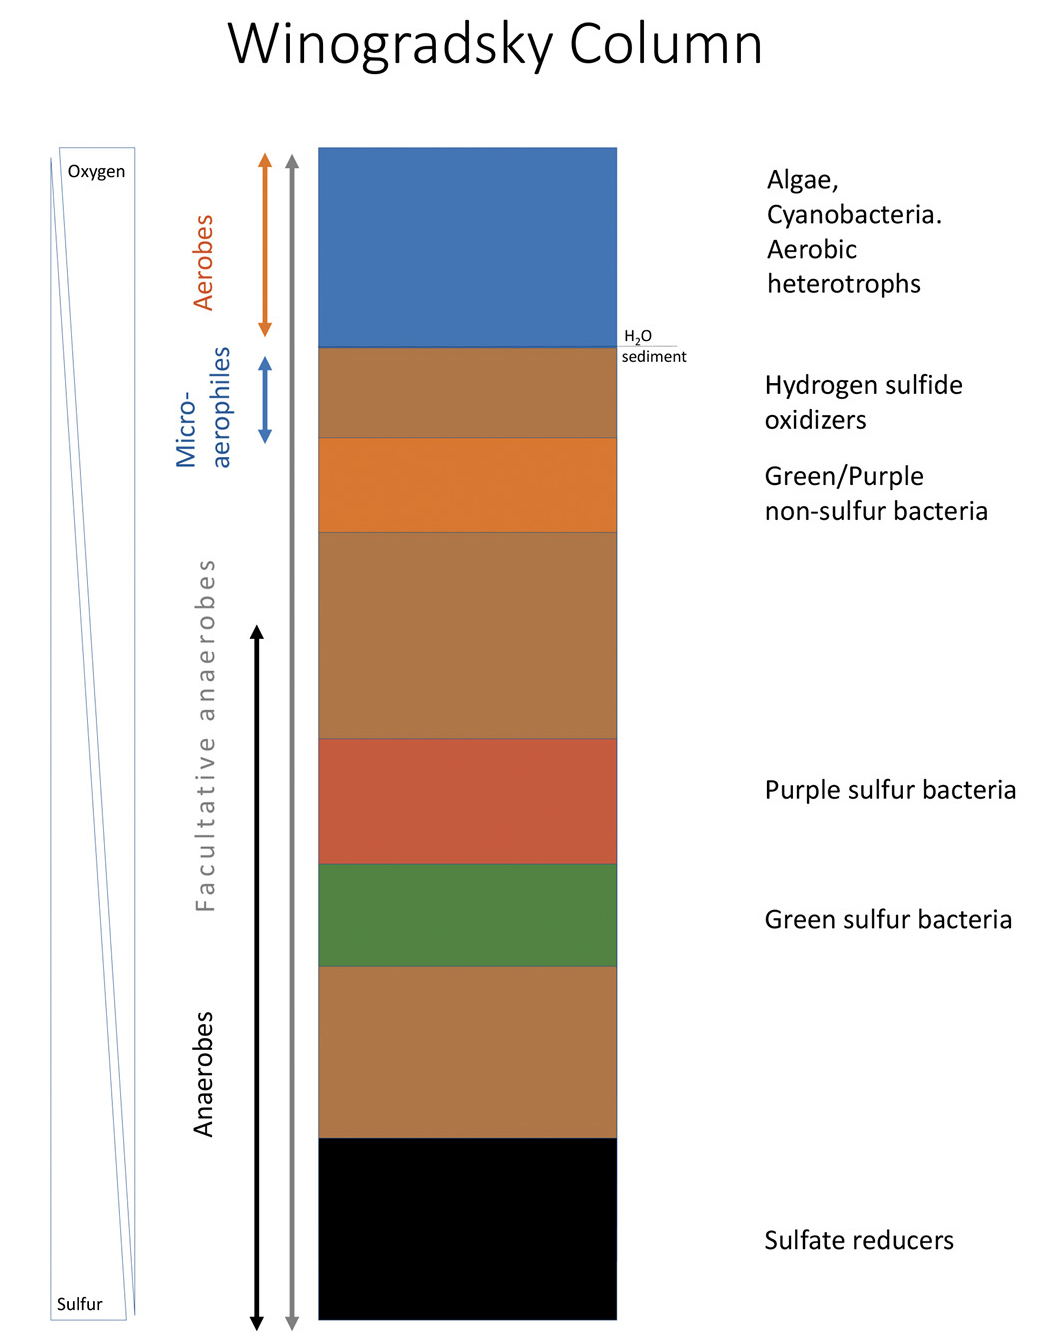 |	FIGURE 2: Winogradsky column microbial communities. Over time, microbial communities form colorful zones based on their oxygen and sulfur requirements. This diagram shows the organisms that will grow in the water and sediment portions of the column.